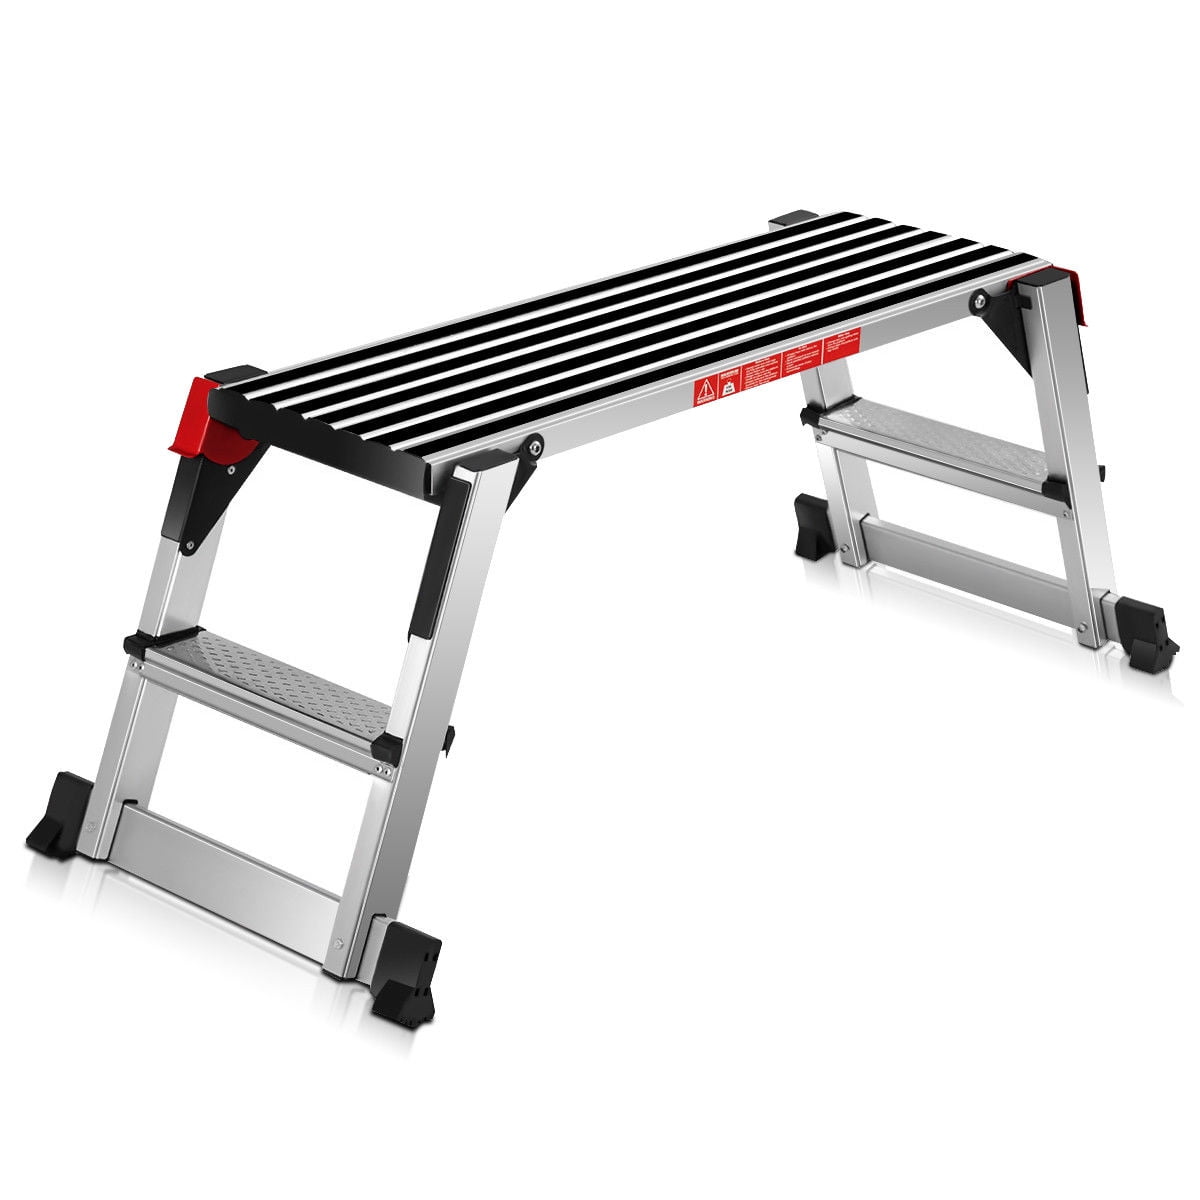 3 STEP COLLAPSIBLE PORTABLE LADDER HOME CLEANING PLATFORM BENCH STOOL TELESCOPIC 